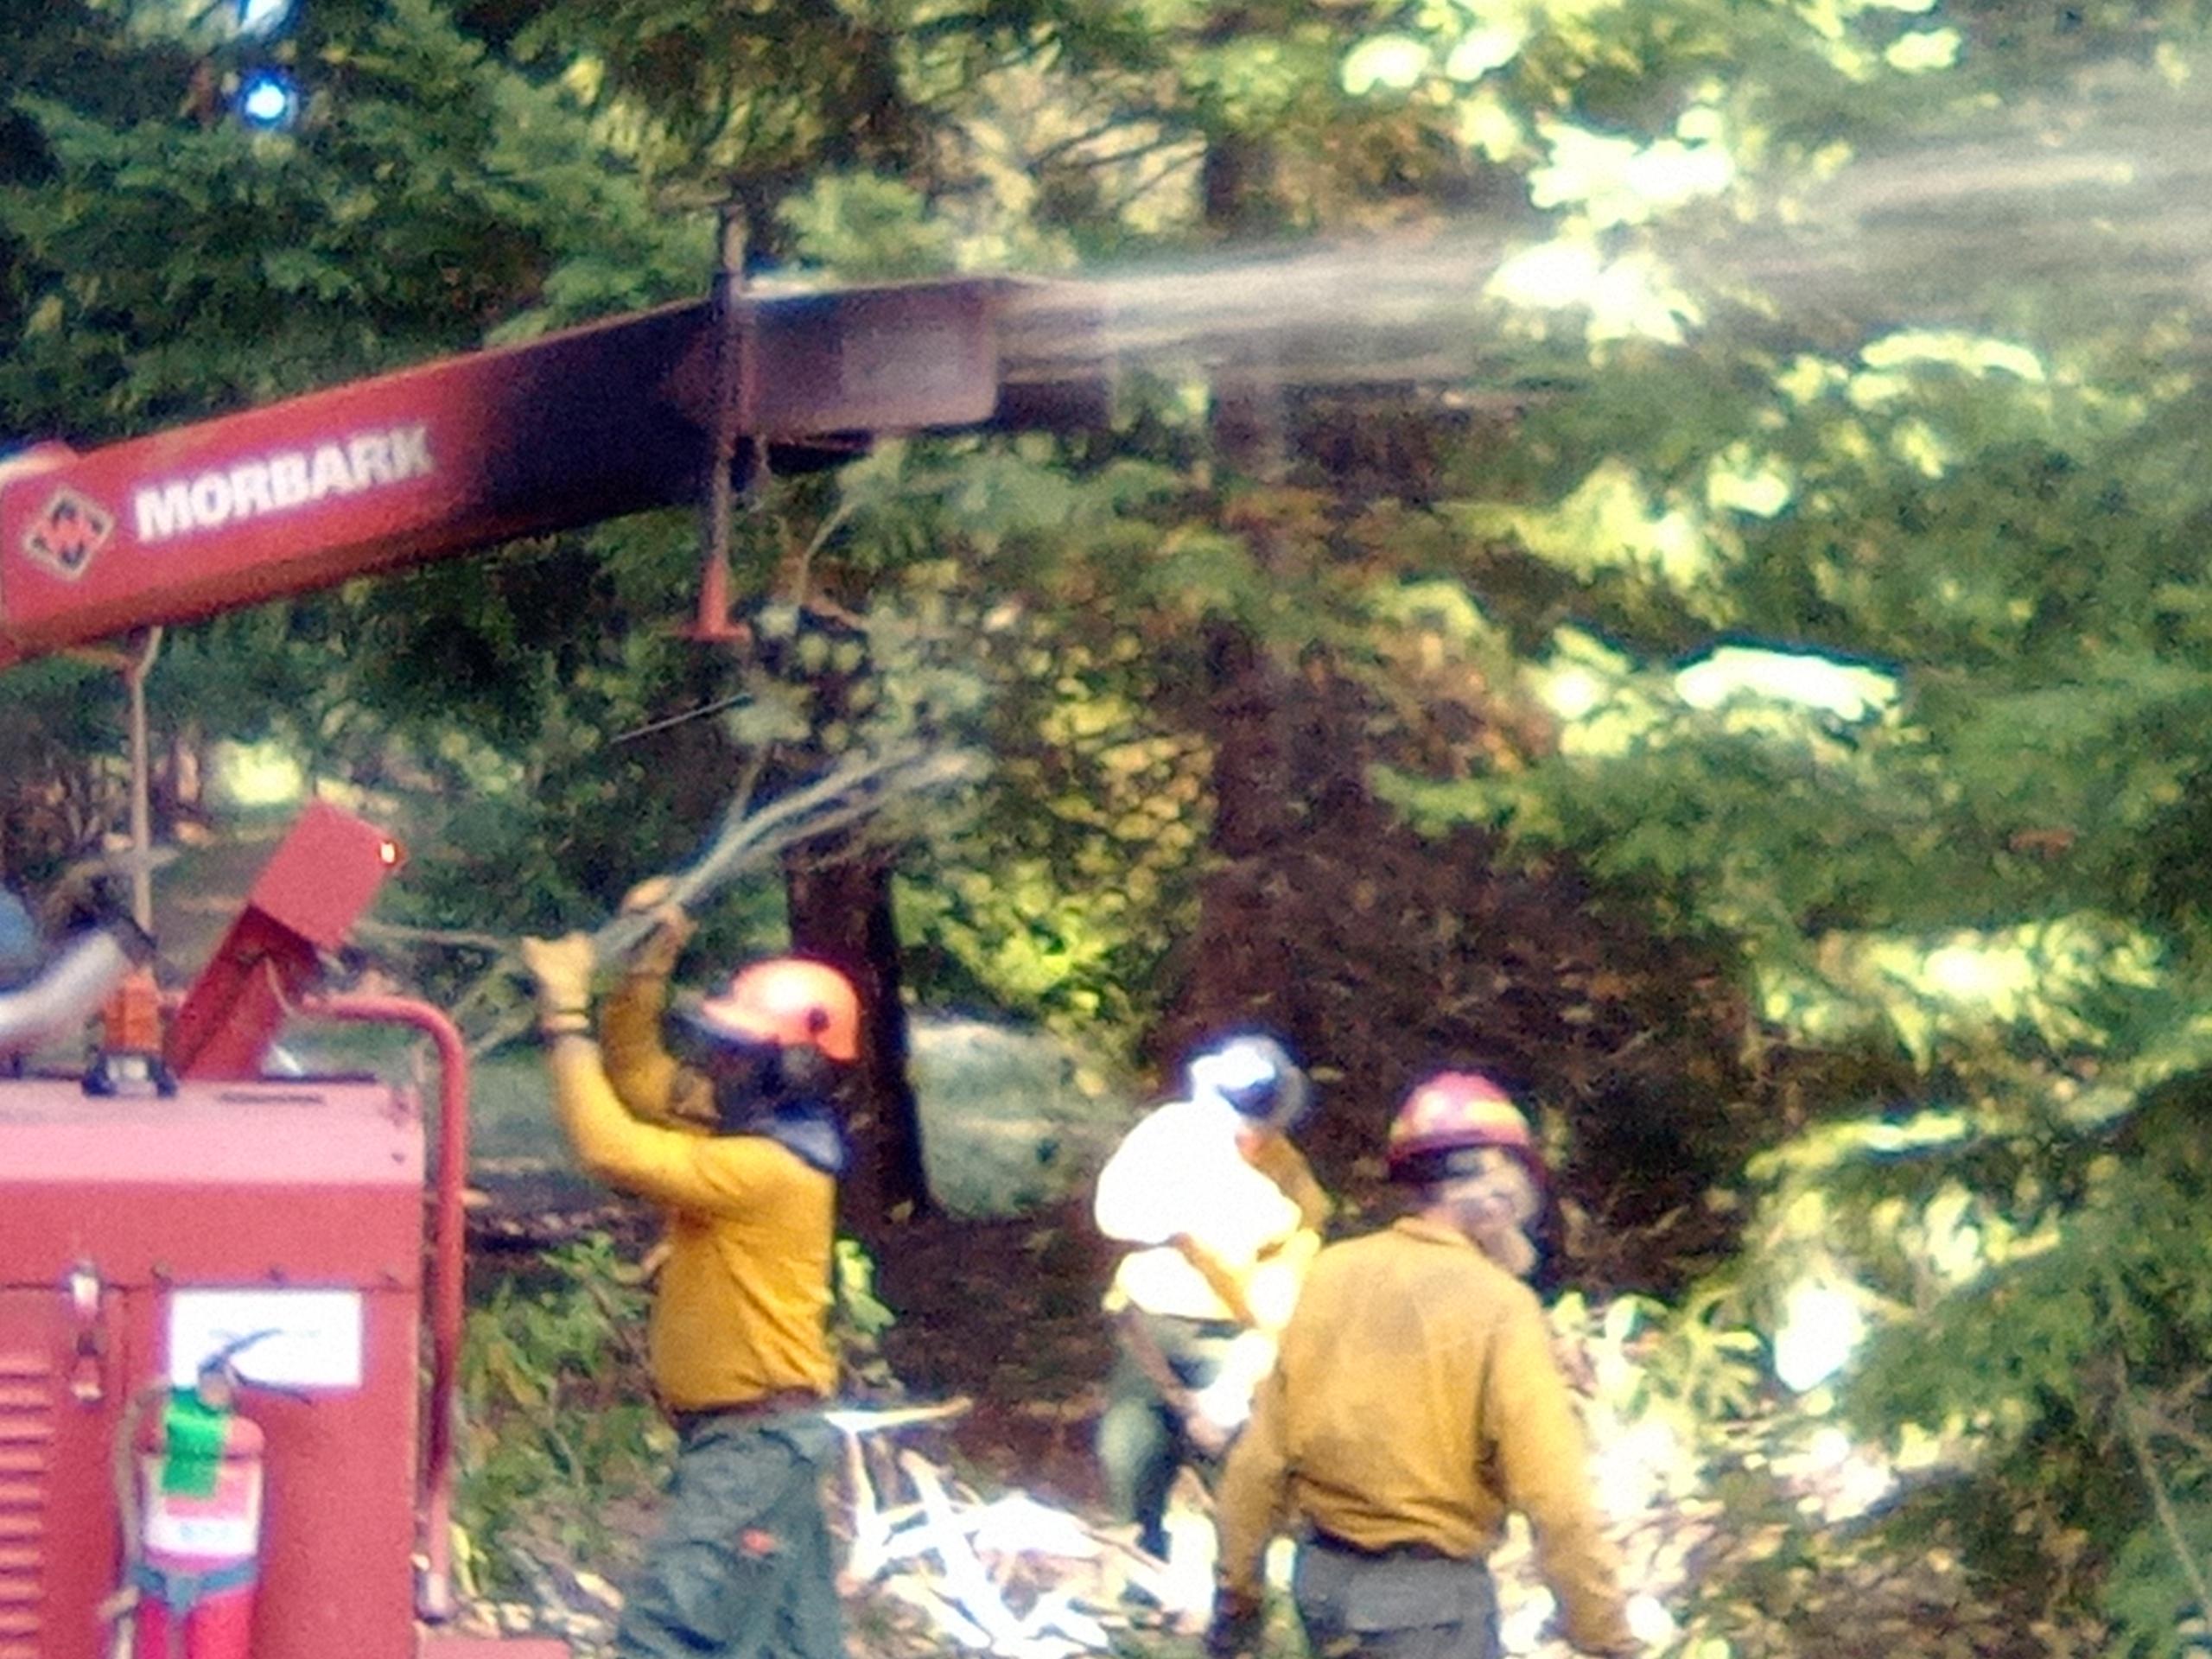 Firefighter loading woody debris into chipper while two others gather more debris